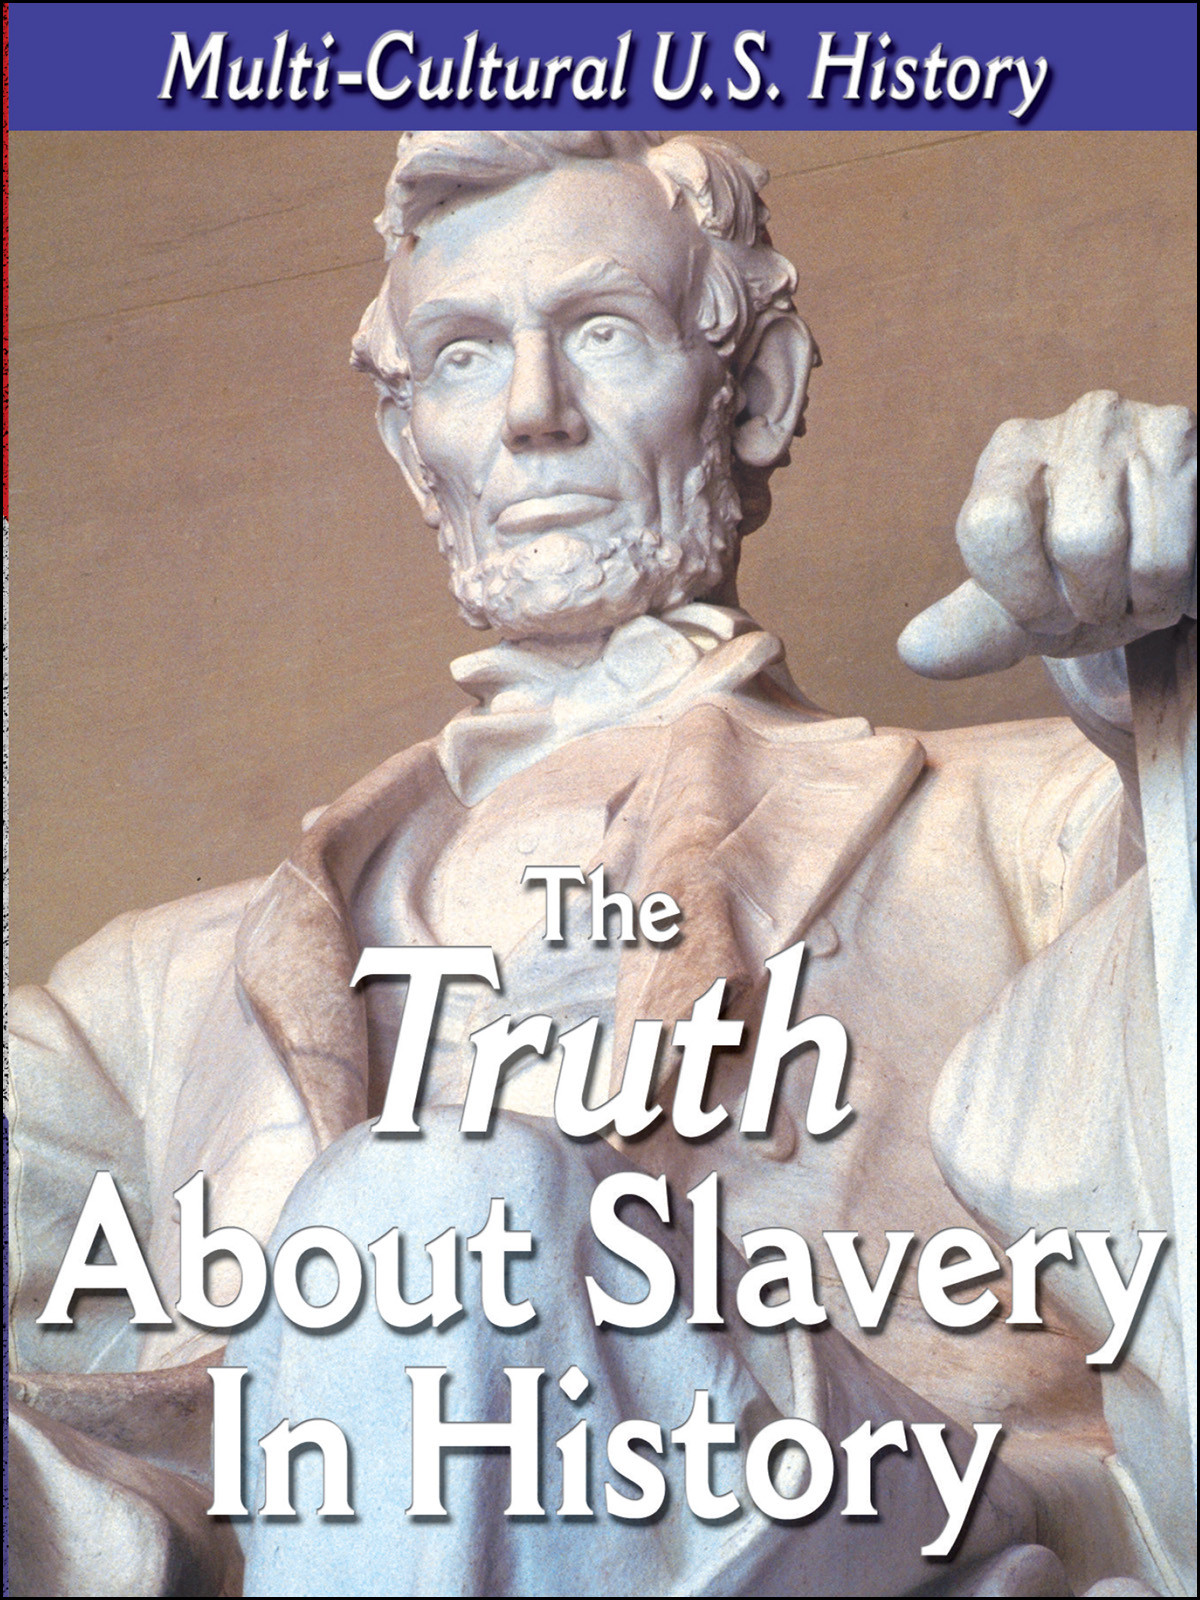 L923 - The History of the United States The Truth About Slavery